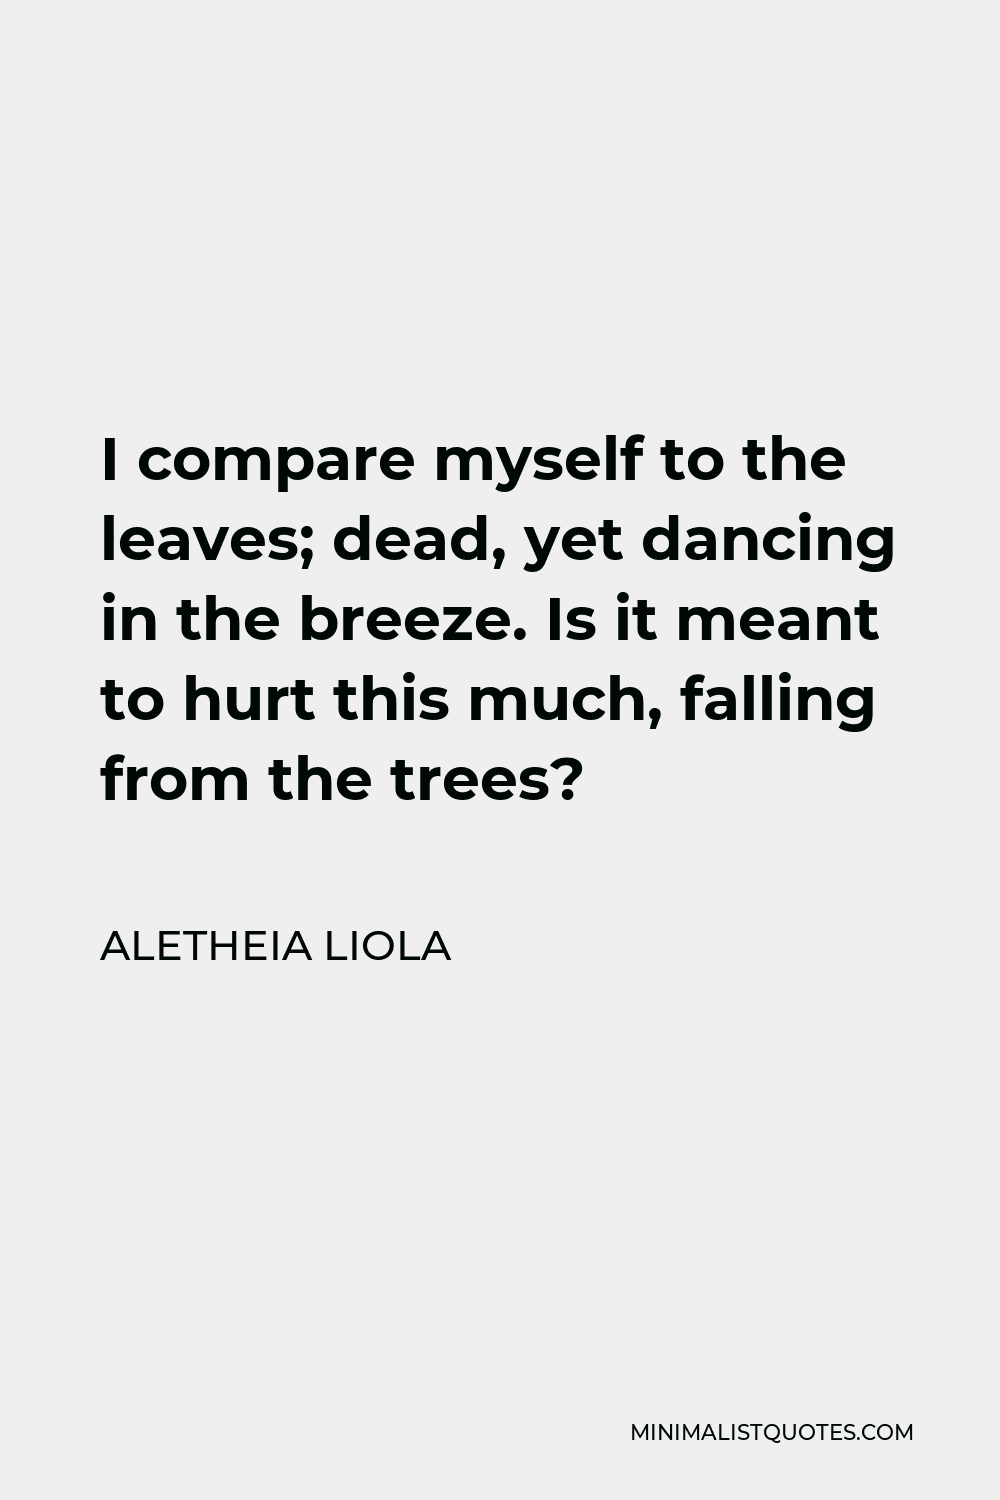 Aletheia Liola Quote - I compare myself to the leaves; dead, yet dancing in the breeze. Is it meant to hurt this much, falling from the trees?